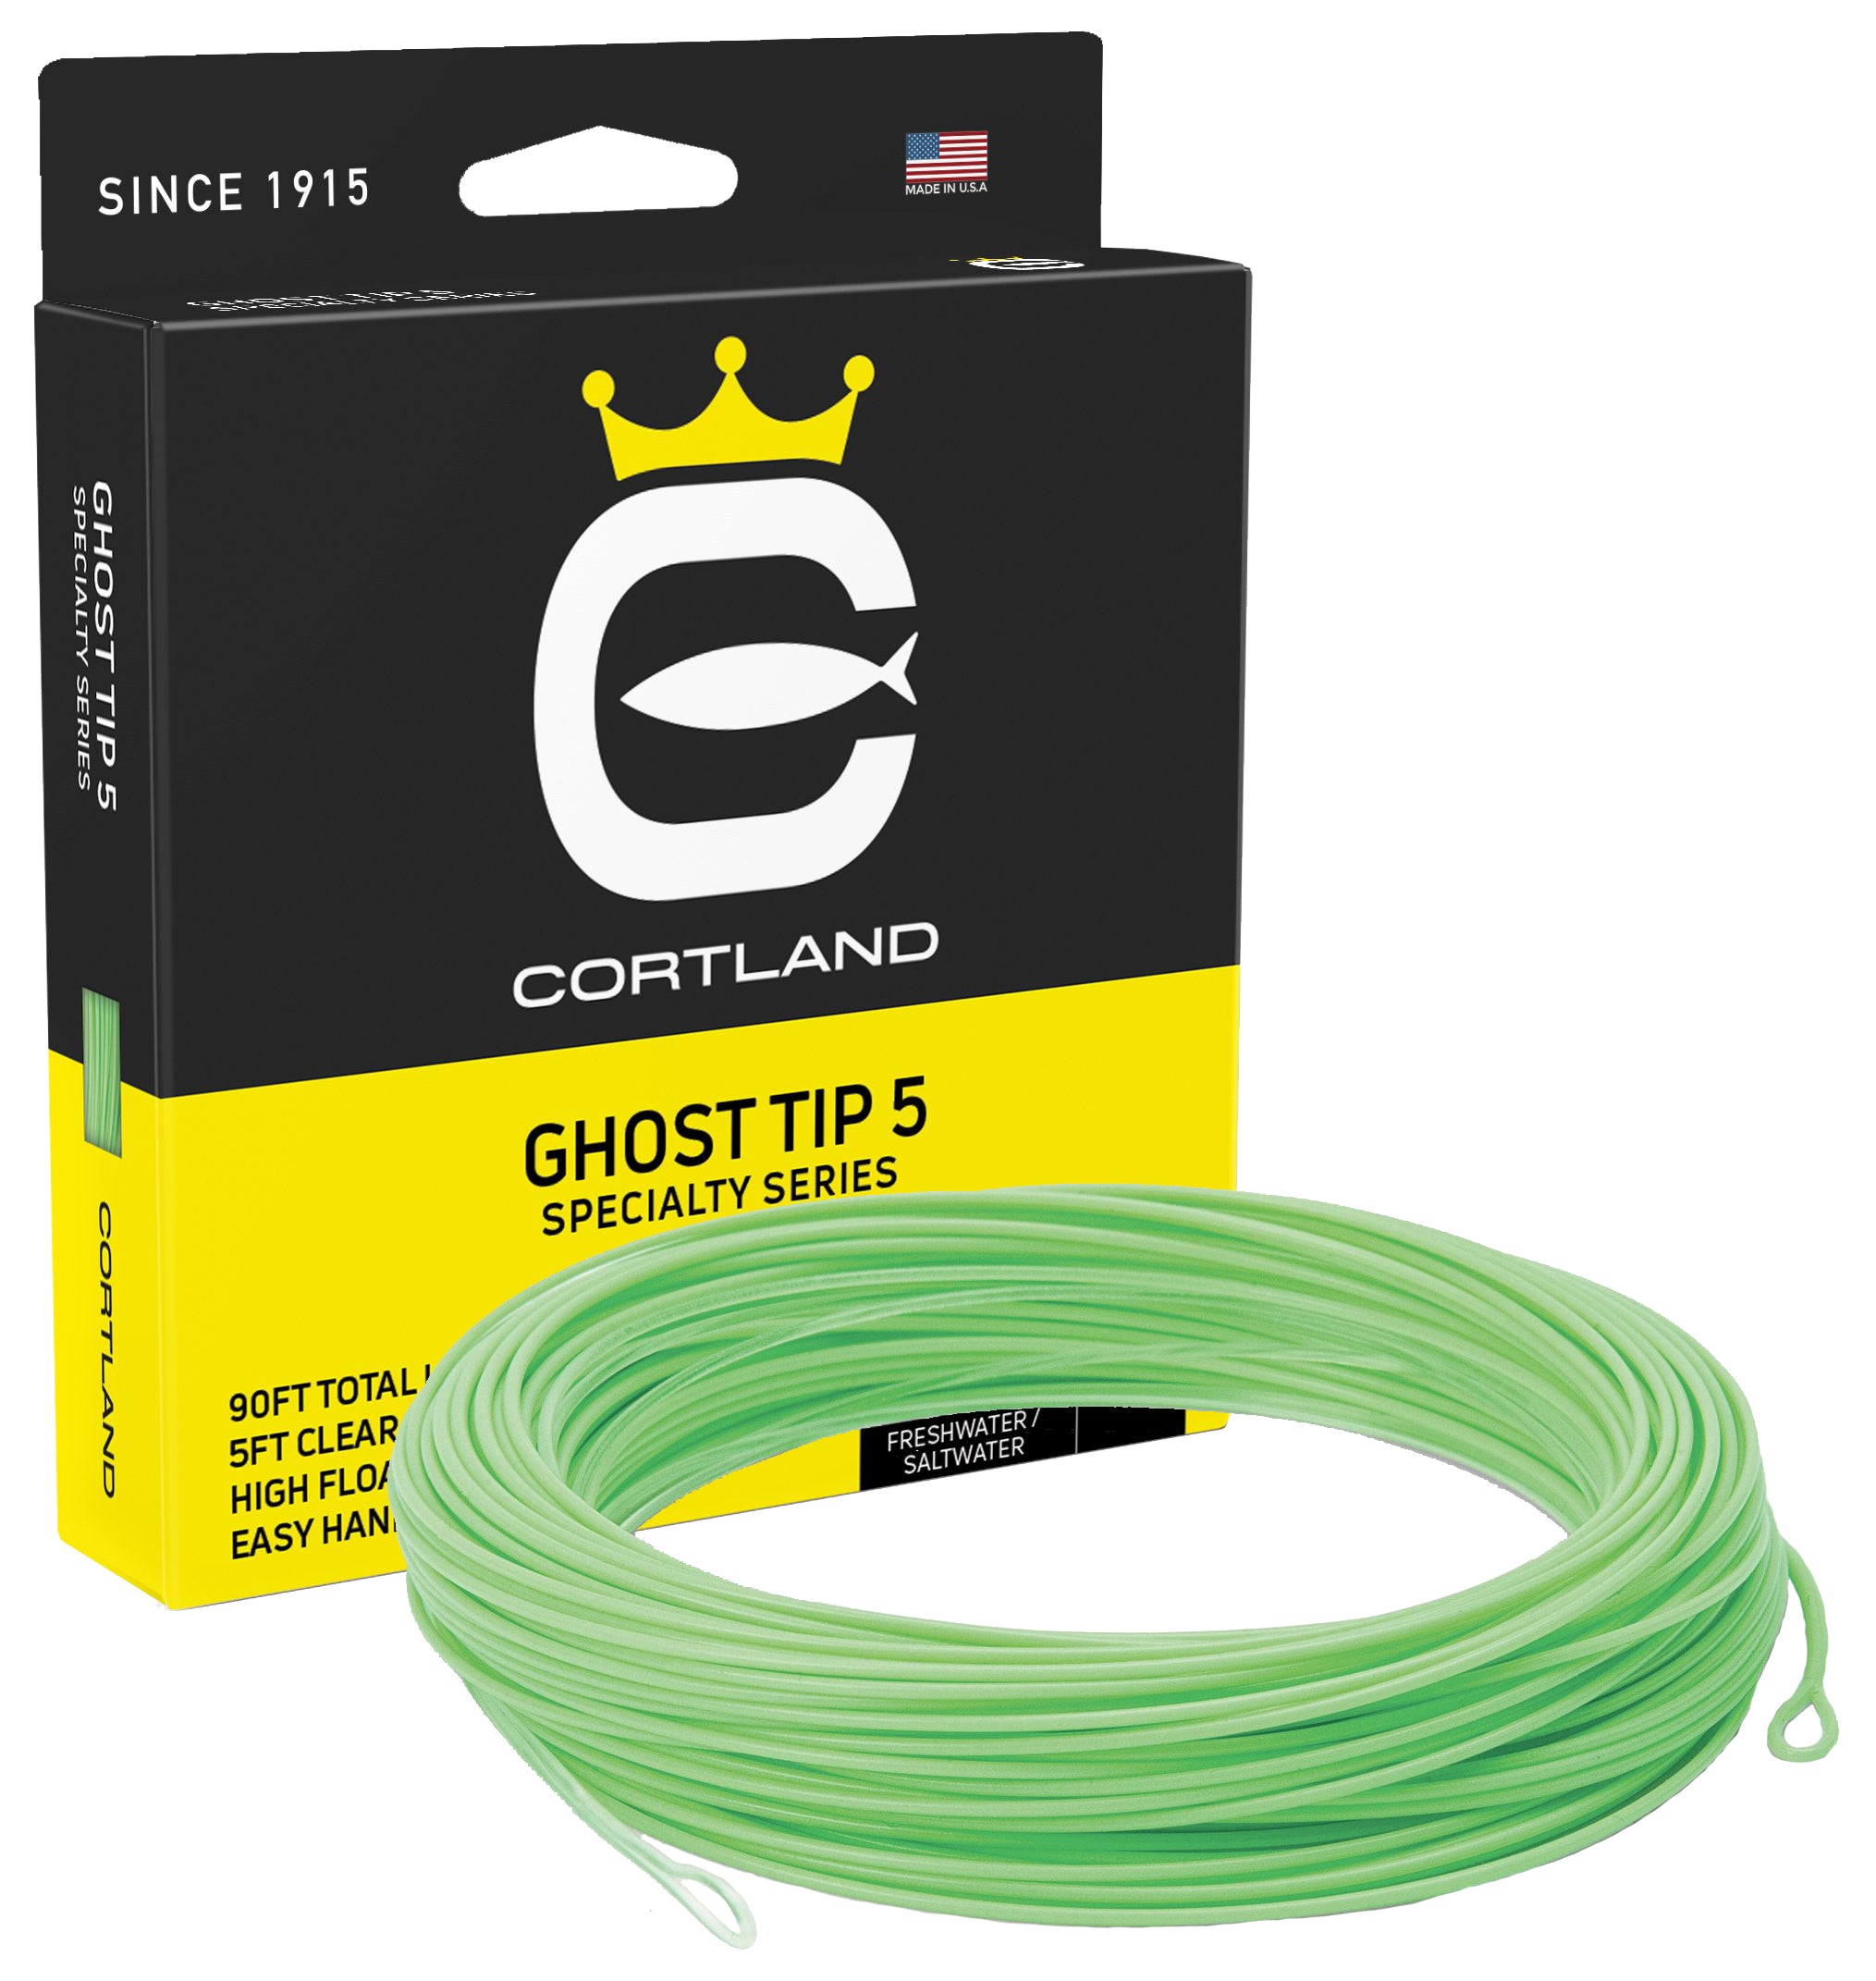 Cortland Speciality Series Ghost Tip 5 Fly Line